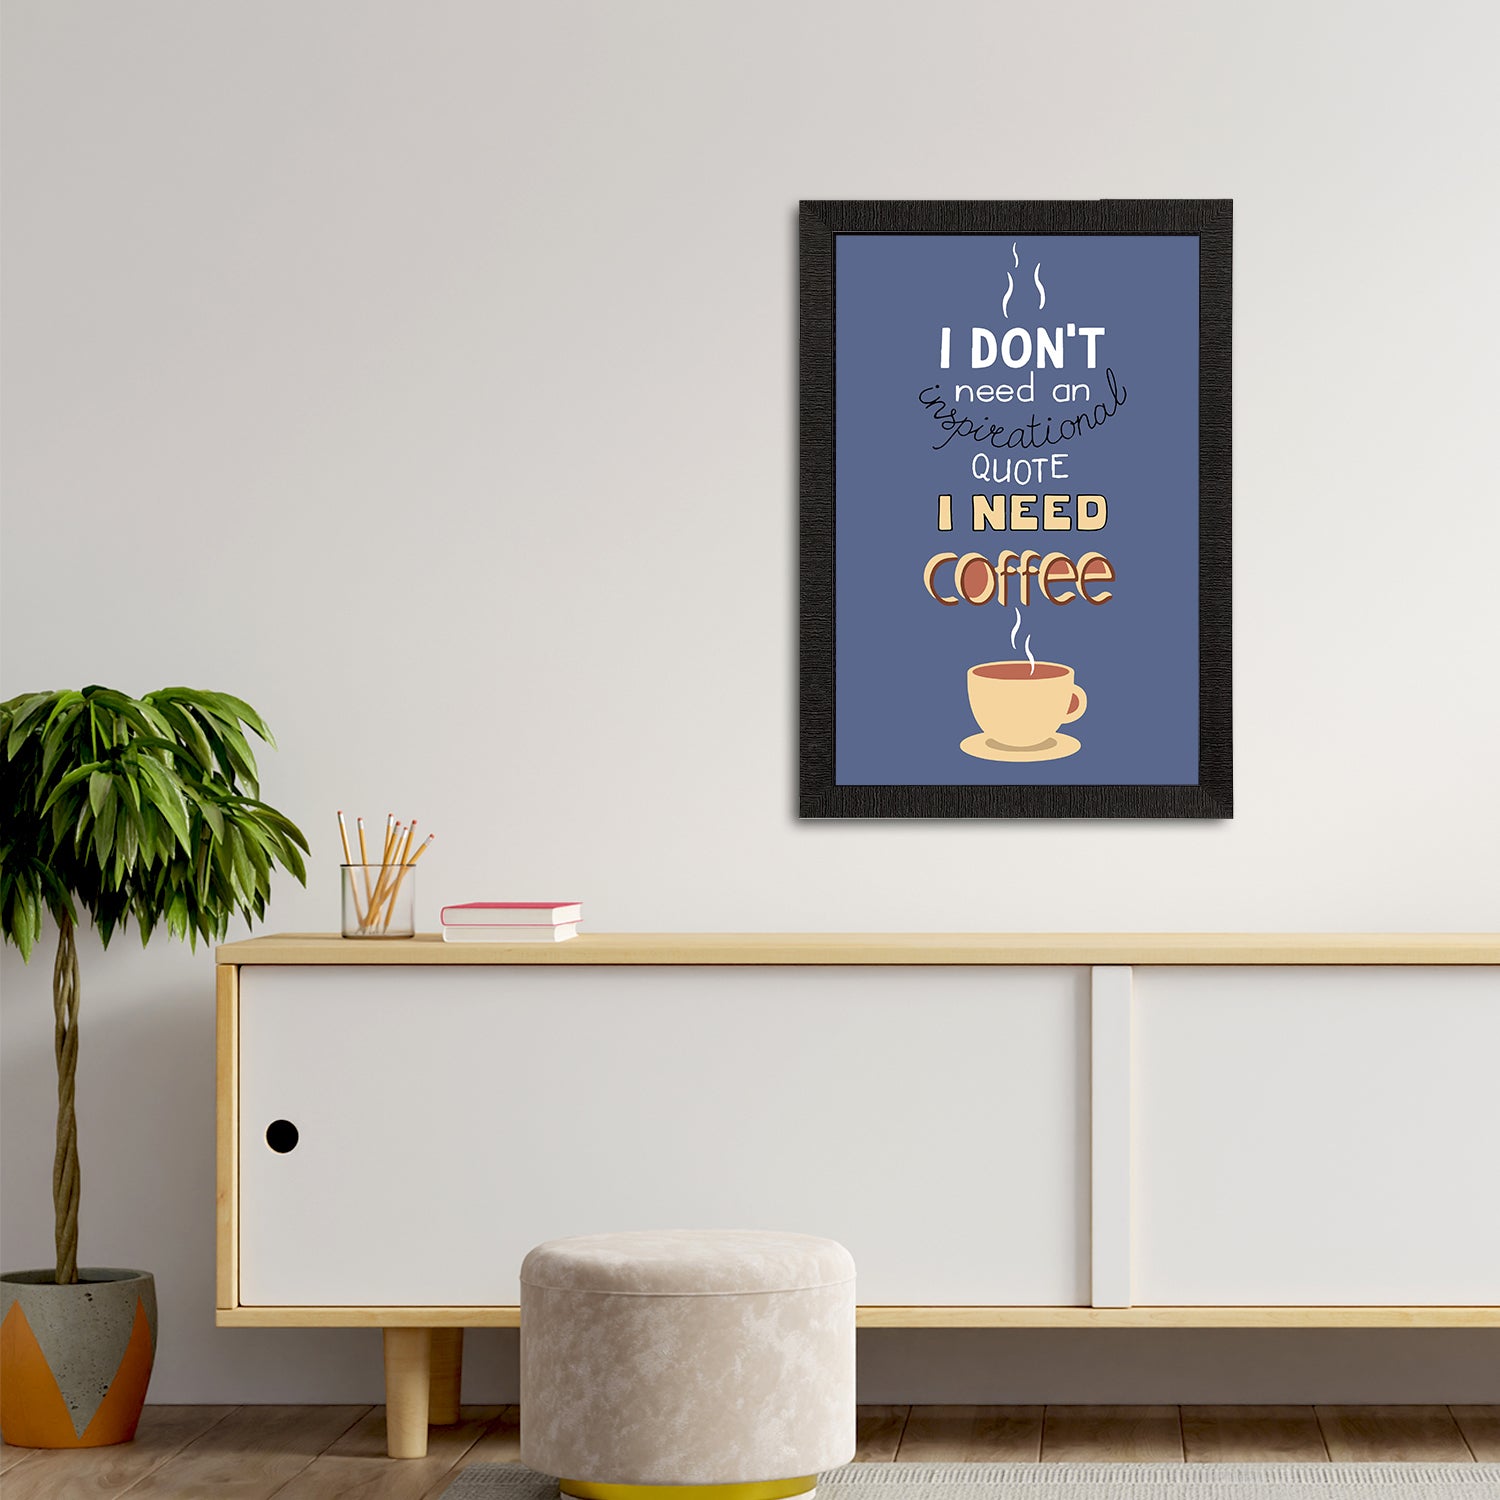 "I Dont Need an Inspirational Quote I Need Coffee" Motivational Quotes Satin Matt Texture UV Art Painting 2